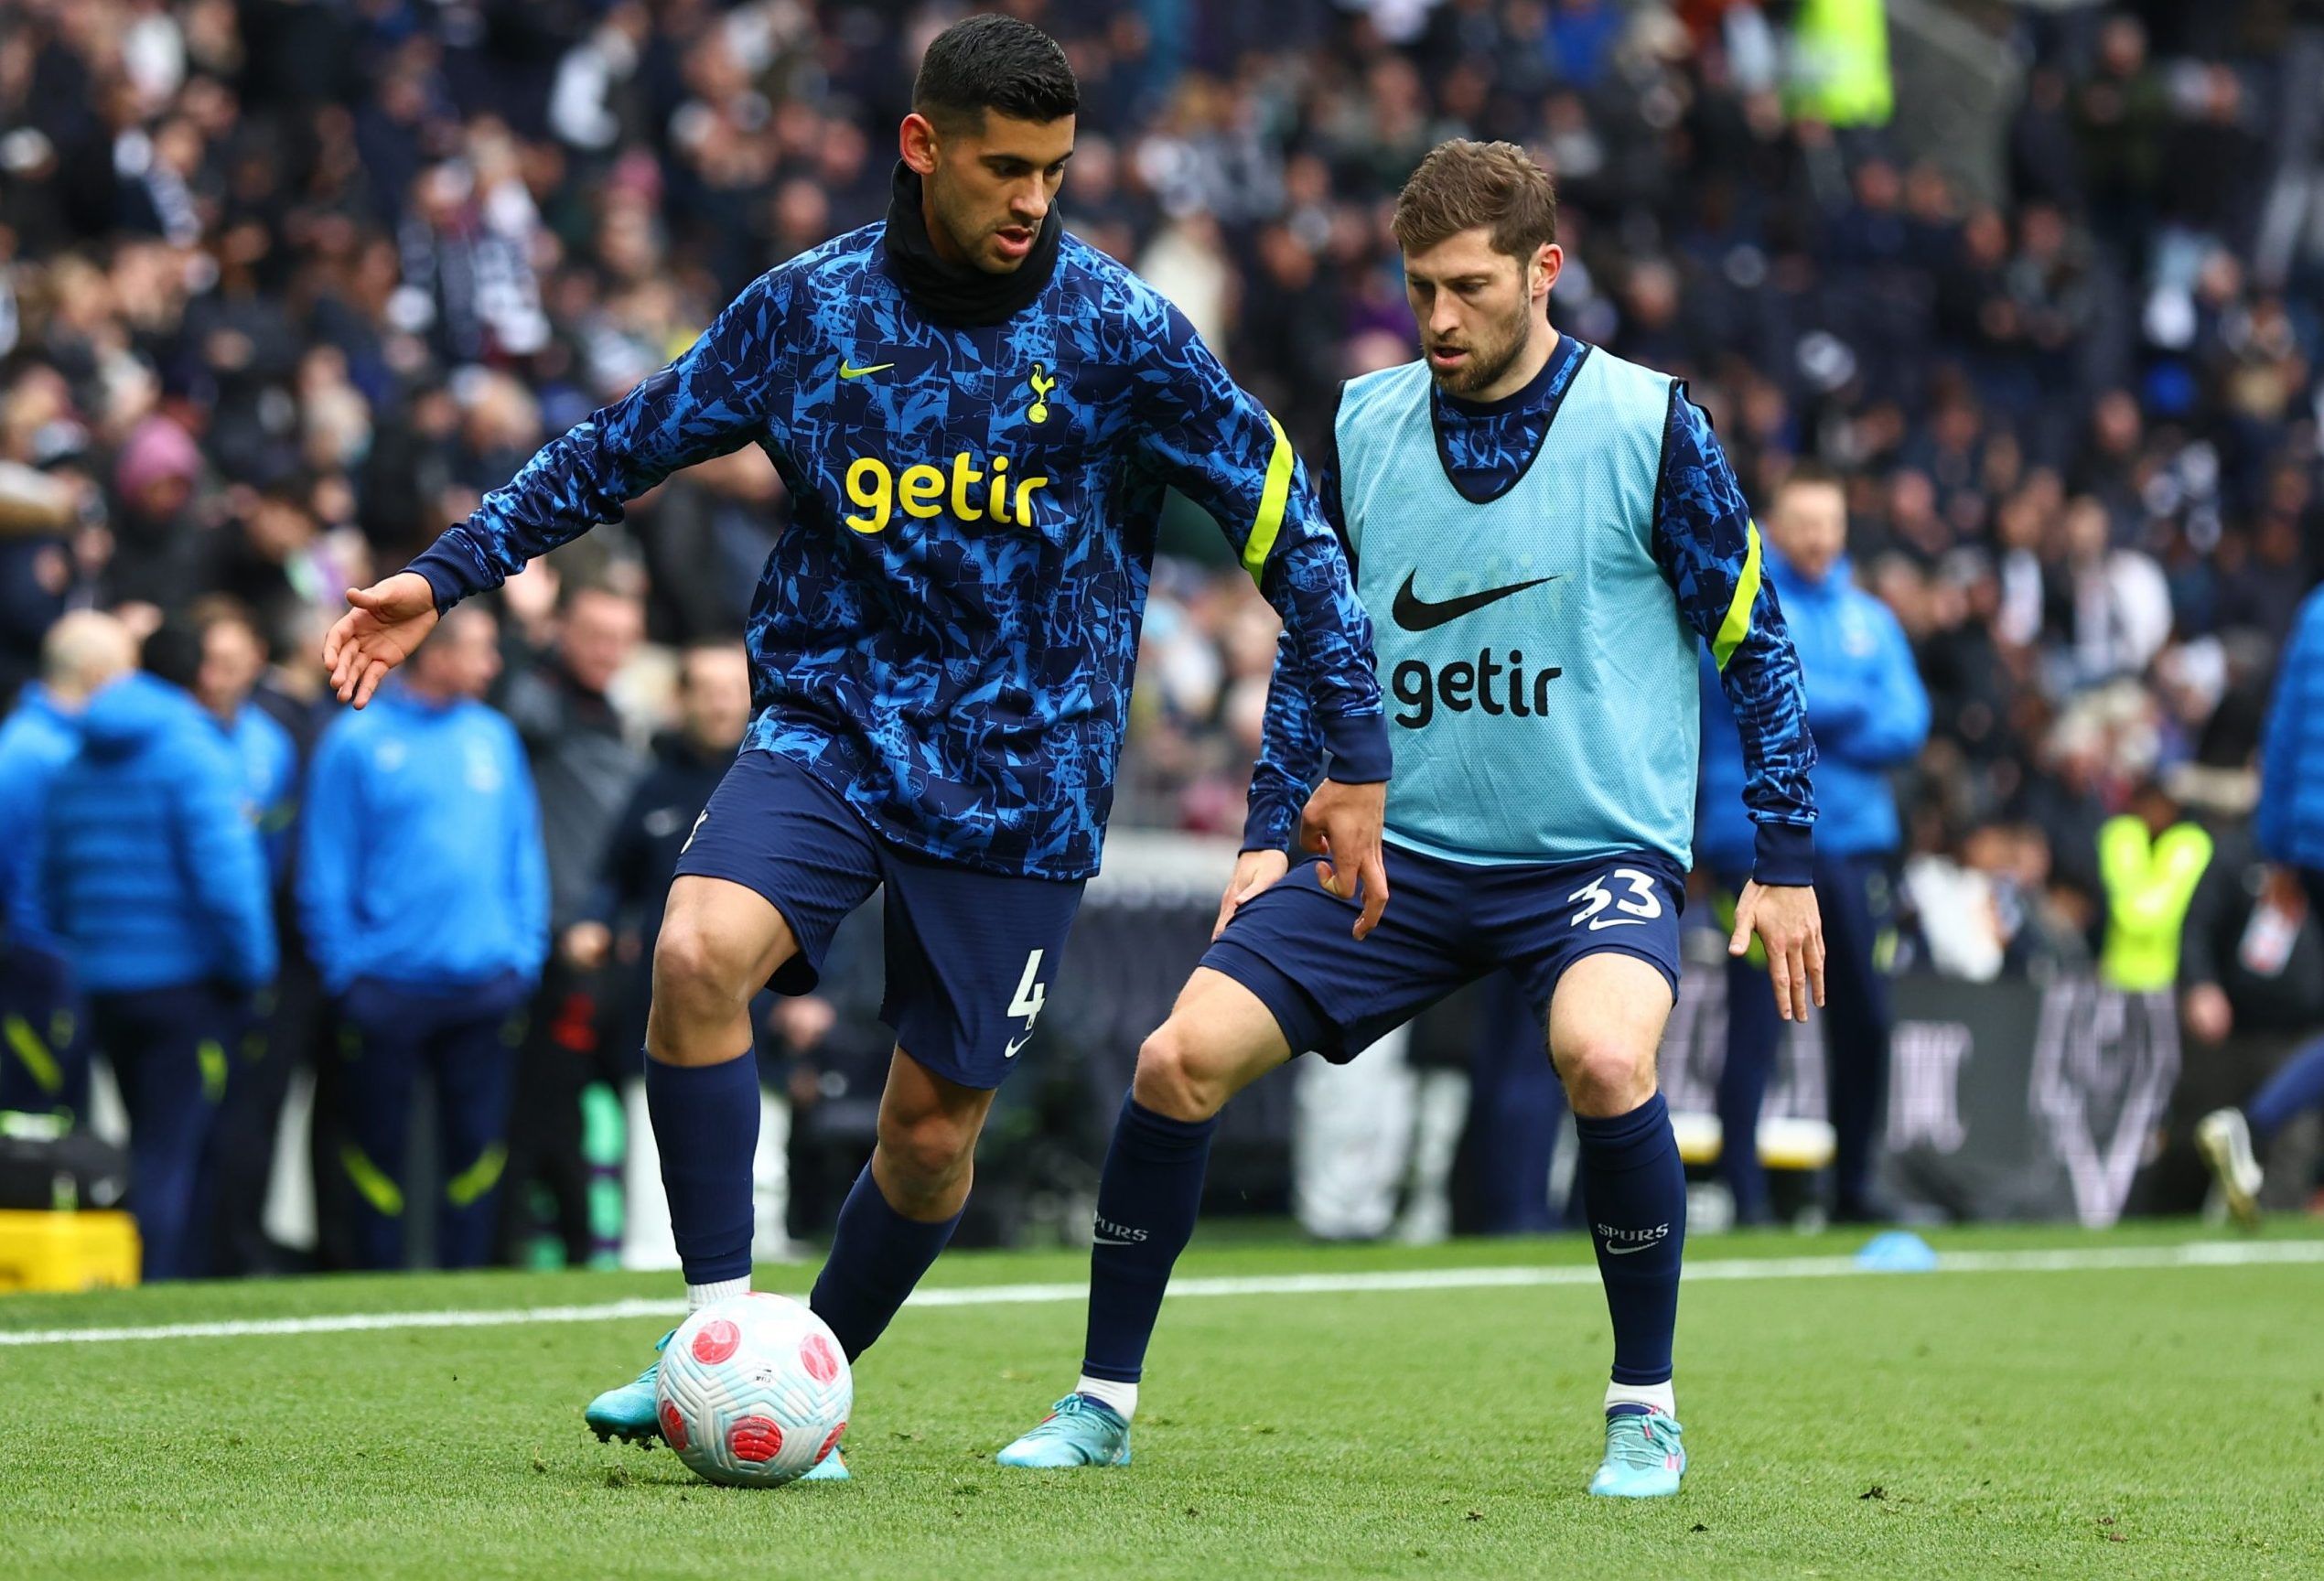 Spurs defender Cristian Romero on the ball during pre-game warm up alongside Ben Davies